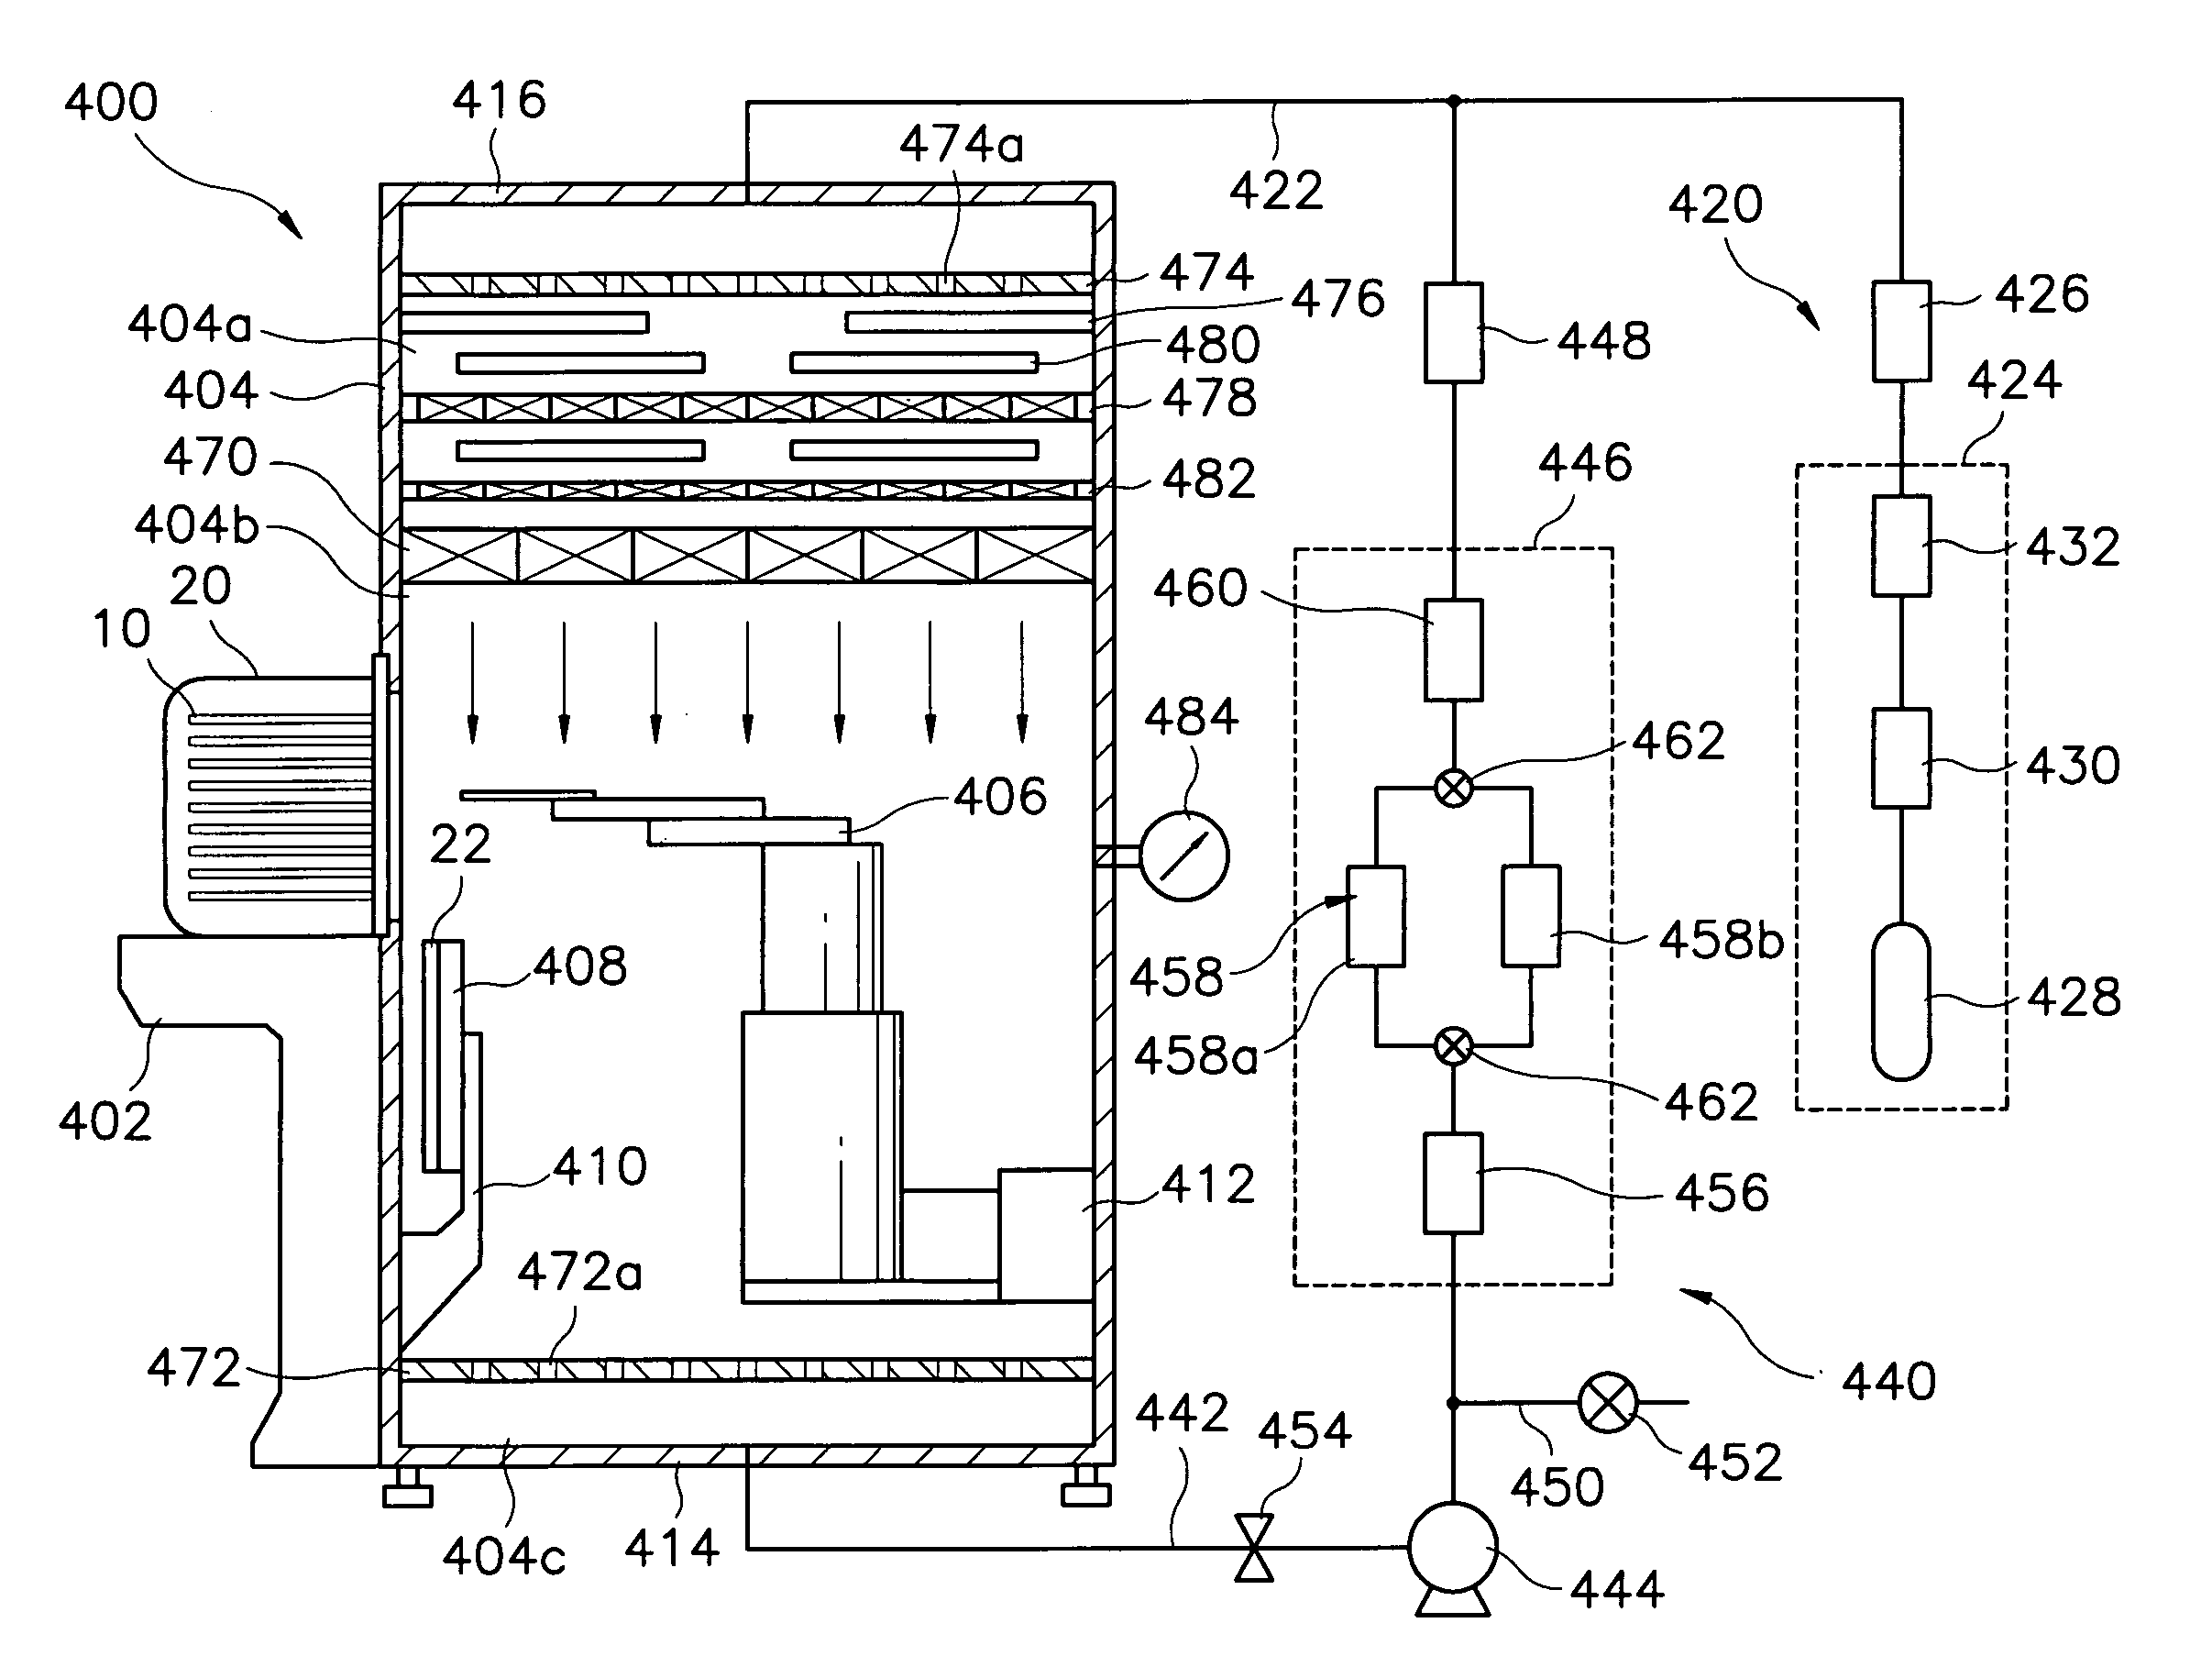 Module for transferring a substrate